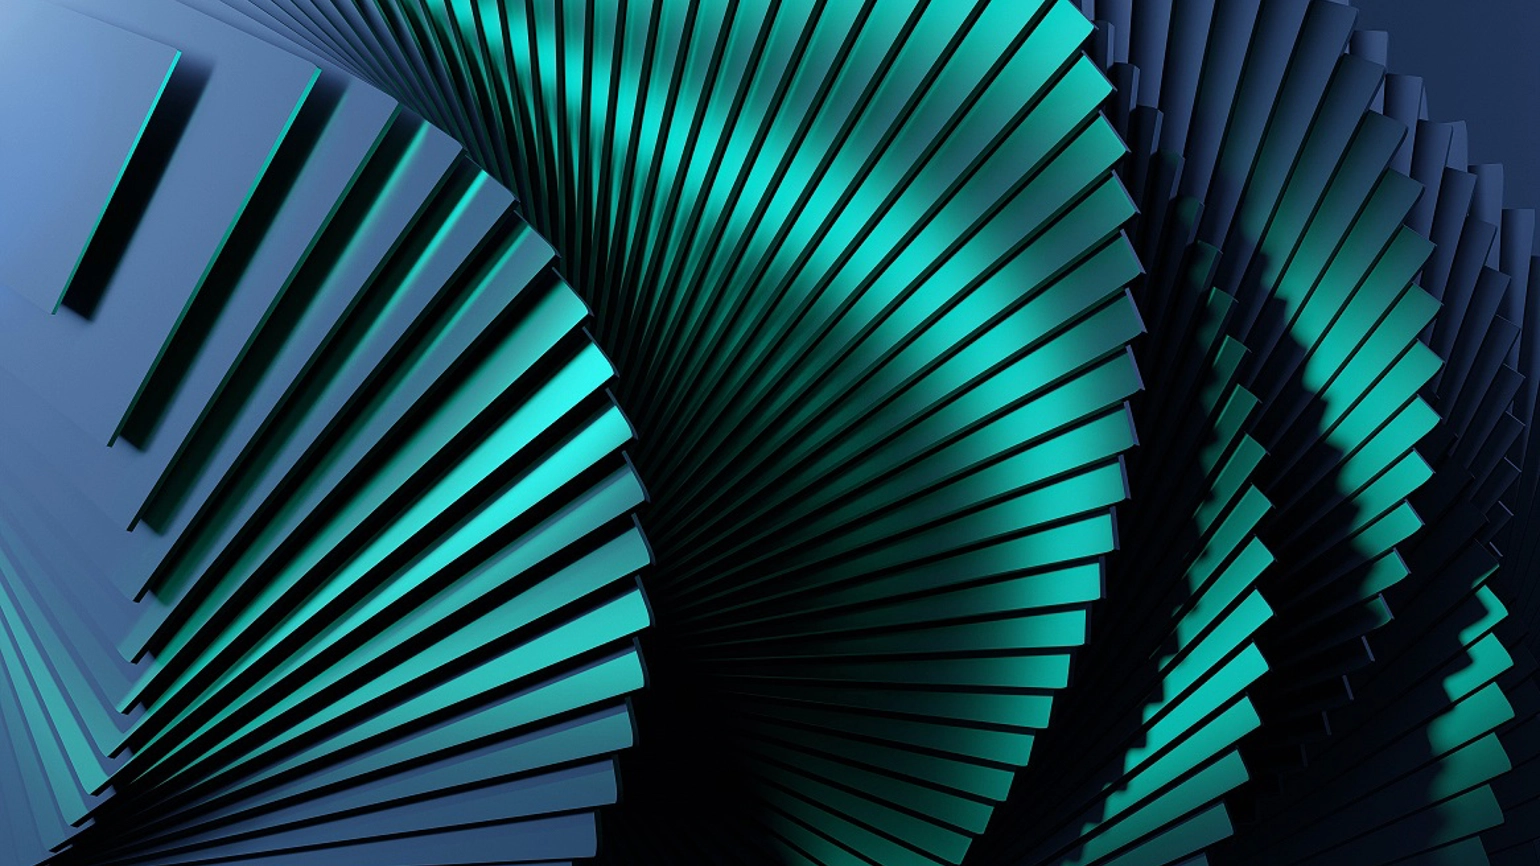 A 3D rendered graphic featuring spiralling fan-like layers in dark teal and mottled florescent green